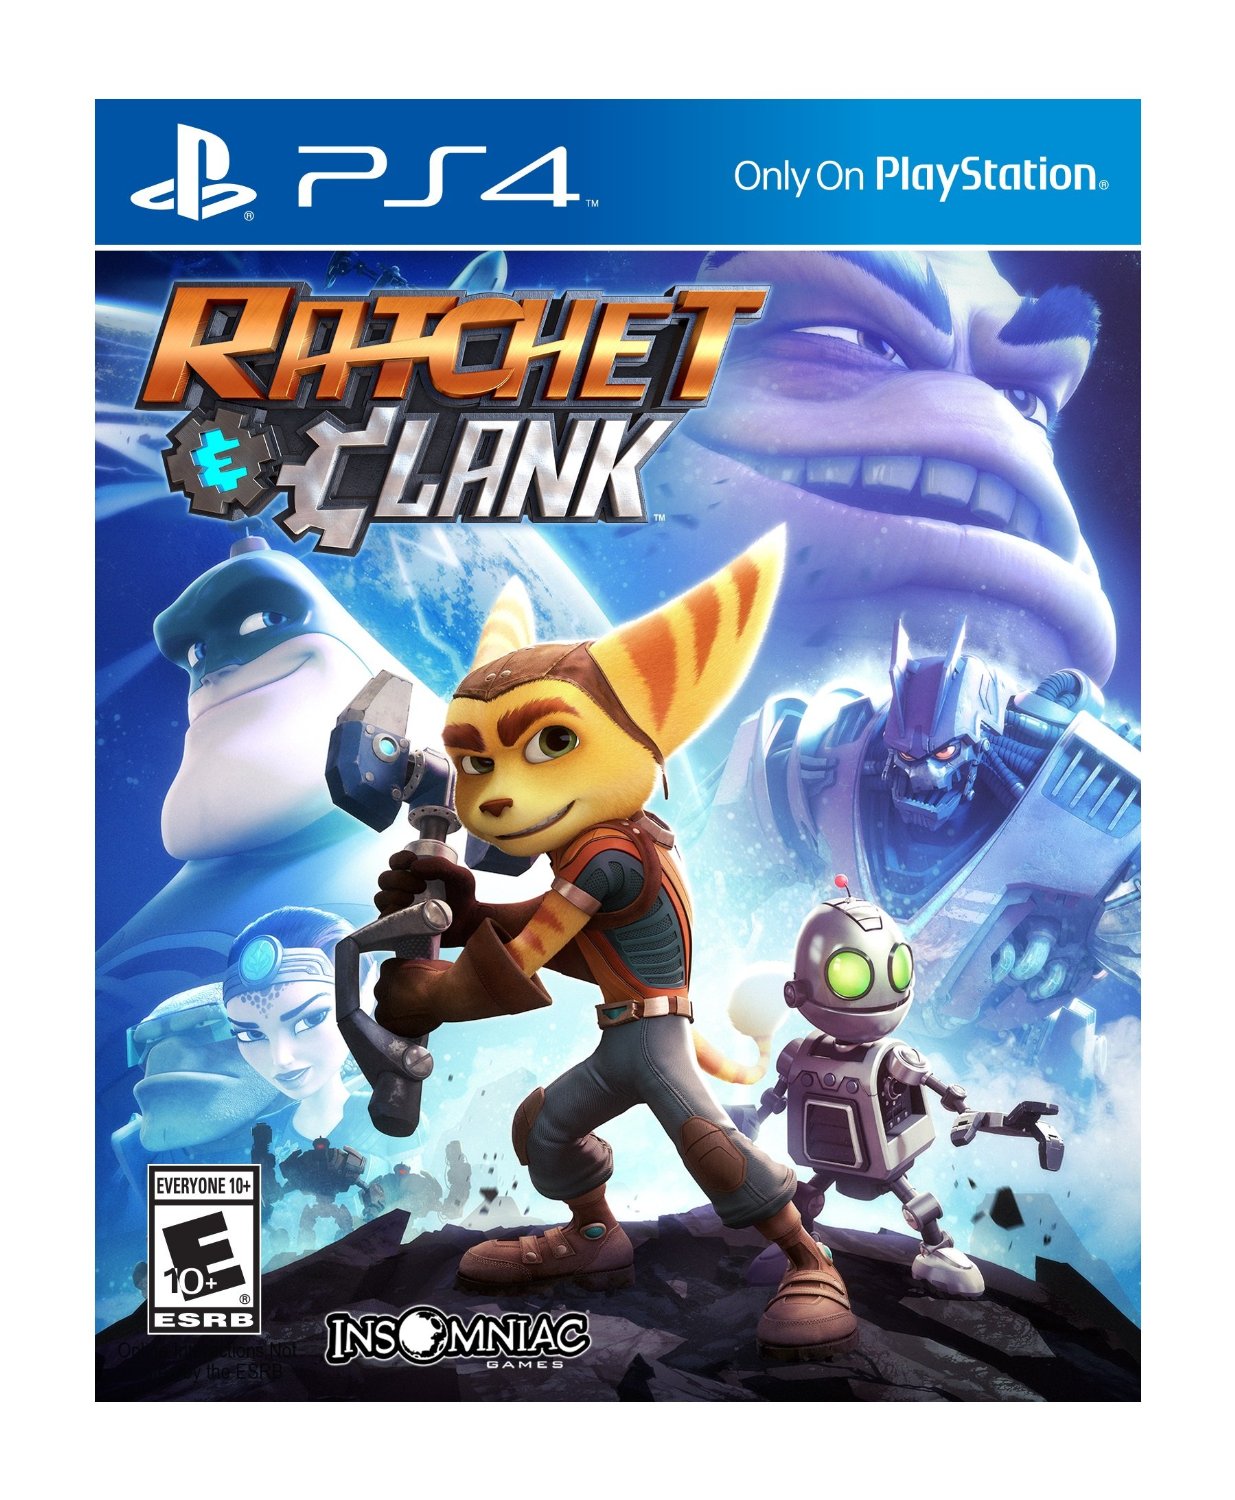 all ratchet and clank games